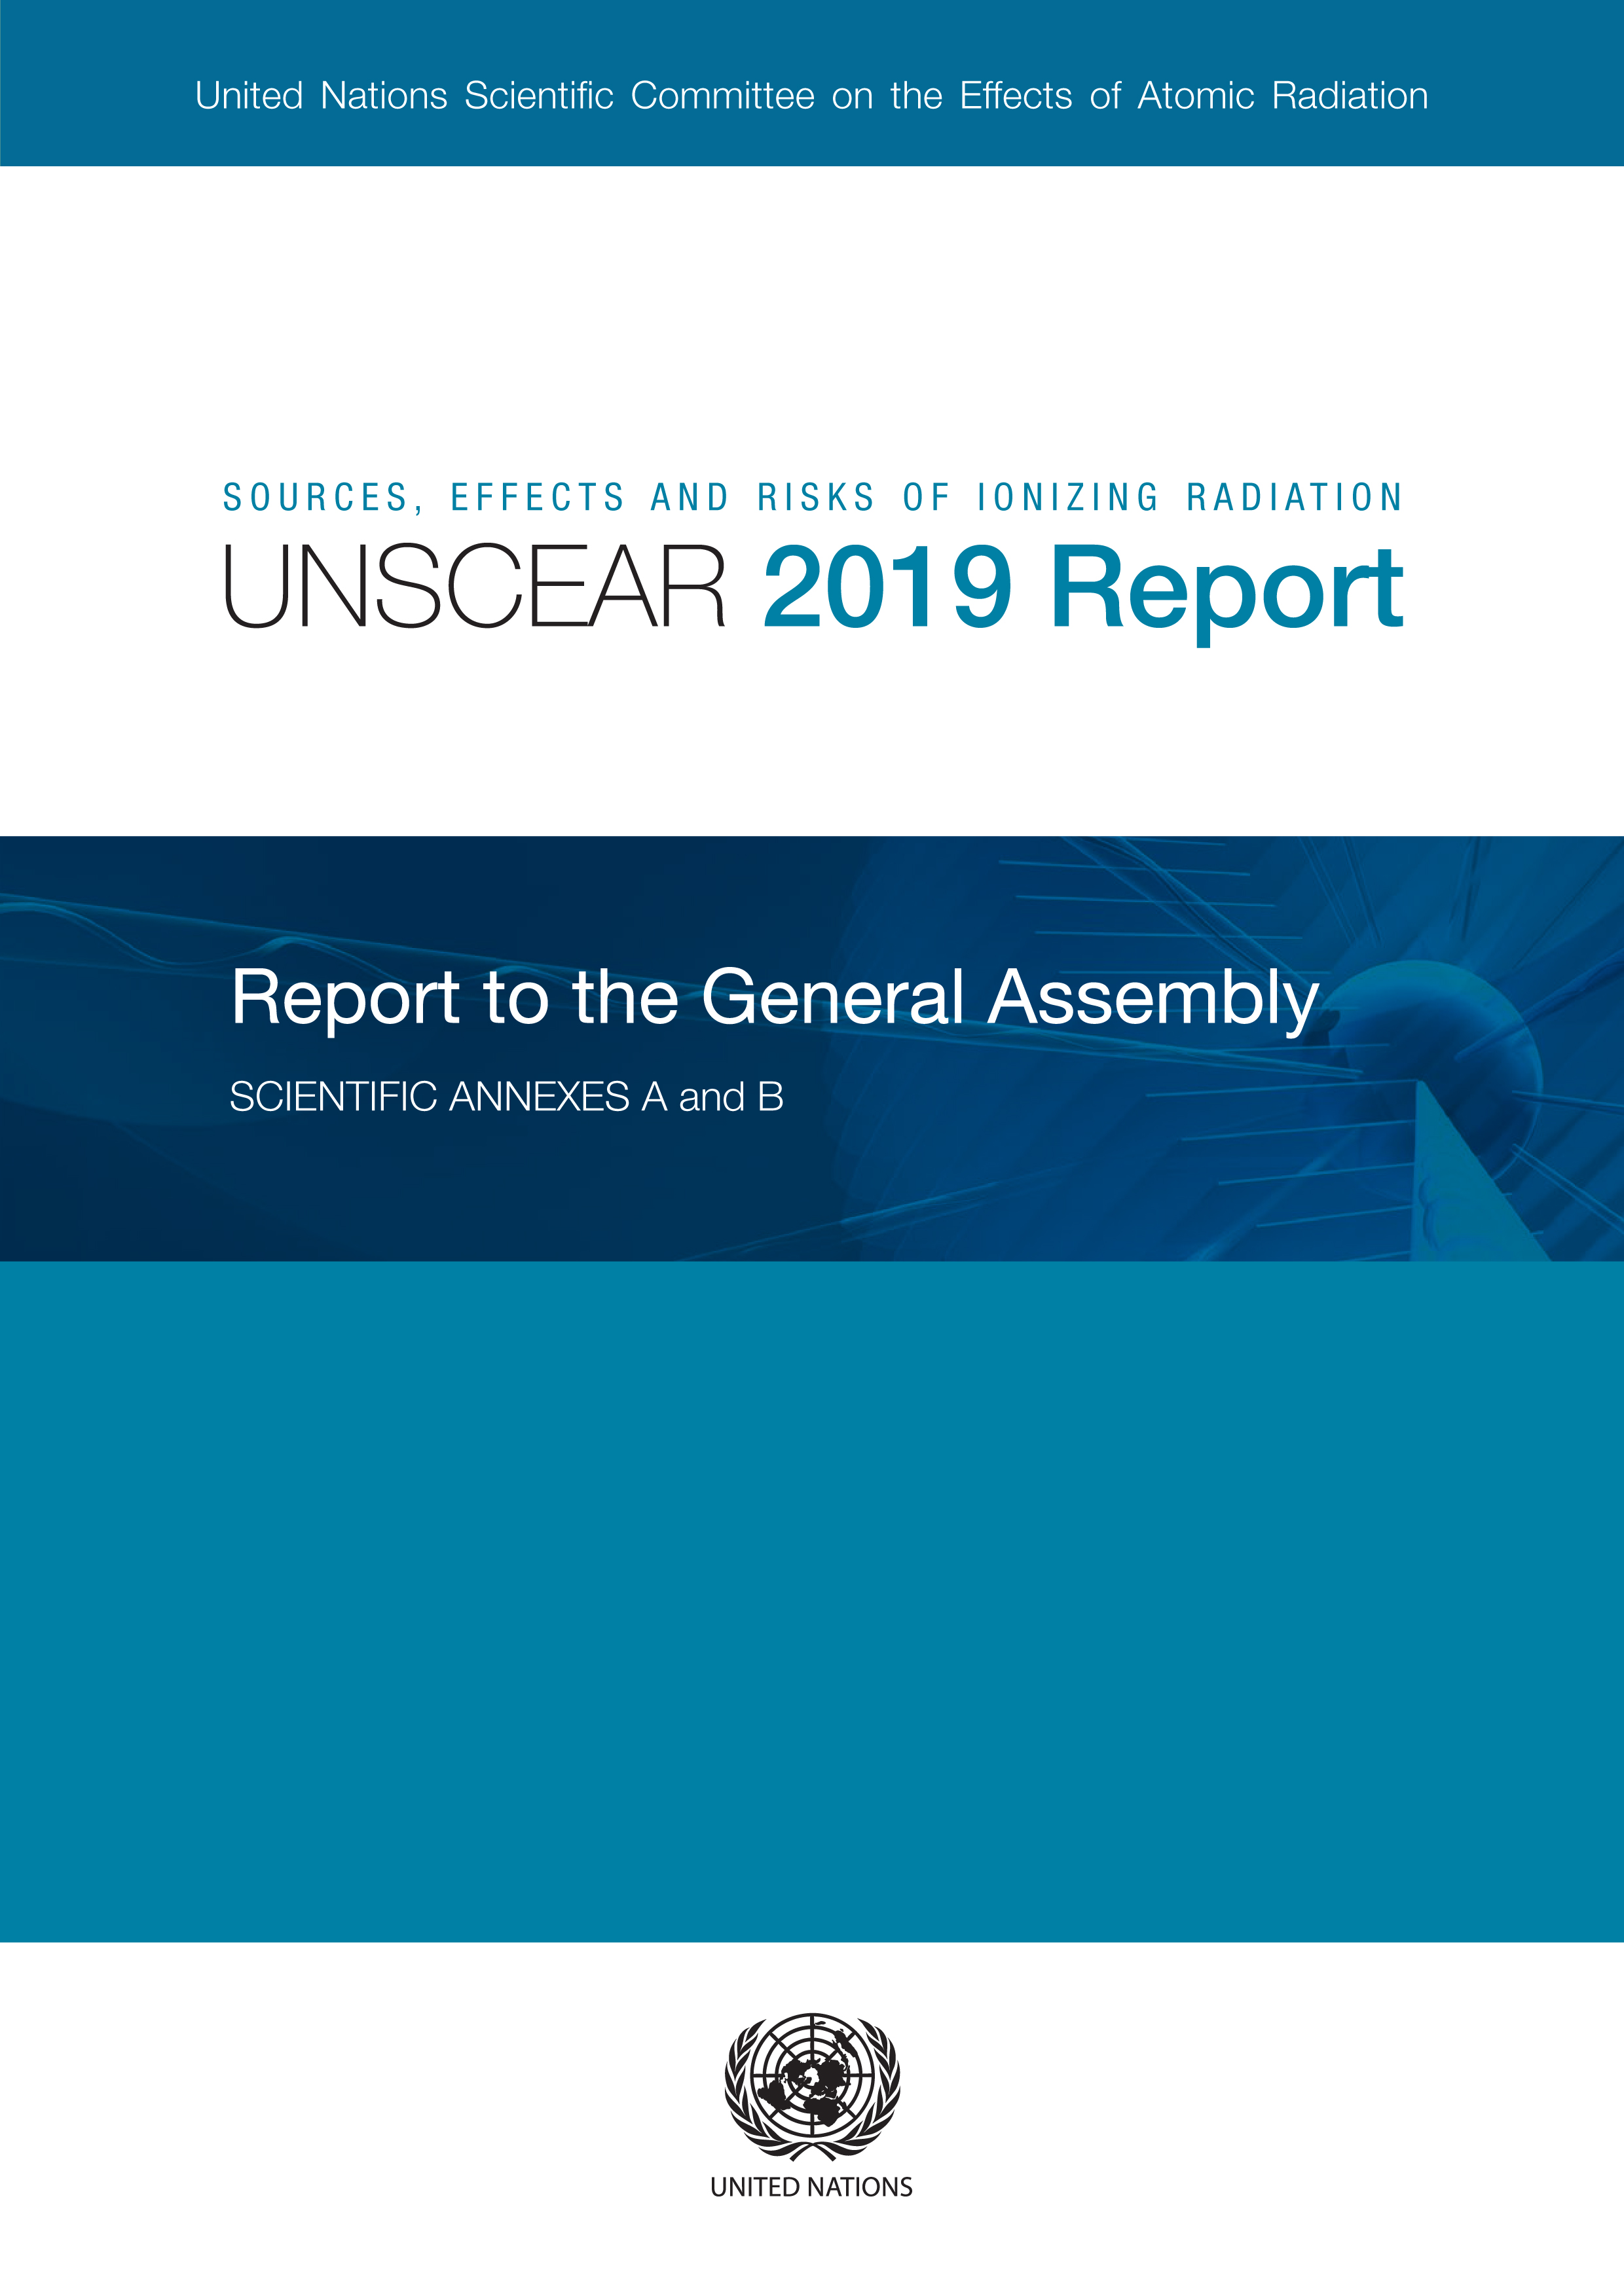 image of Sources, Effects and Risks of Ionizing Radiation, United Nations Scientific Committee on the Effects of Atomic Radiation (UNSCEAR) 2019 Report